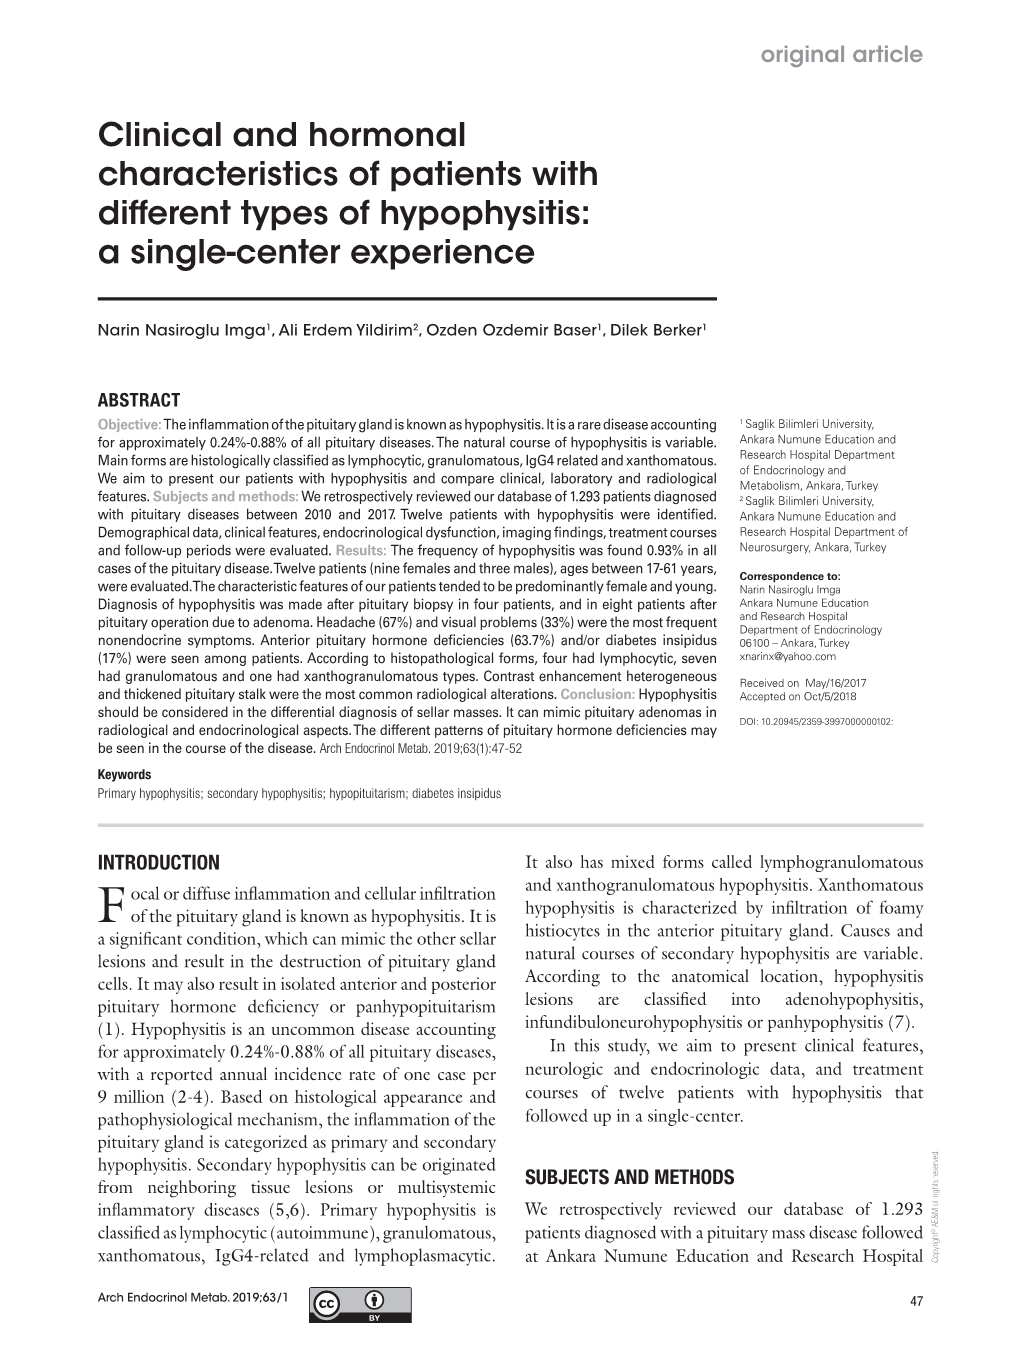 Clinical and Hormonal Characteristics of Patients with Different Types Of